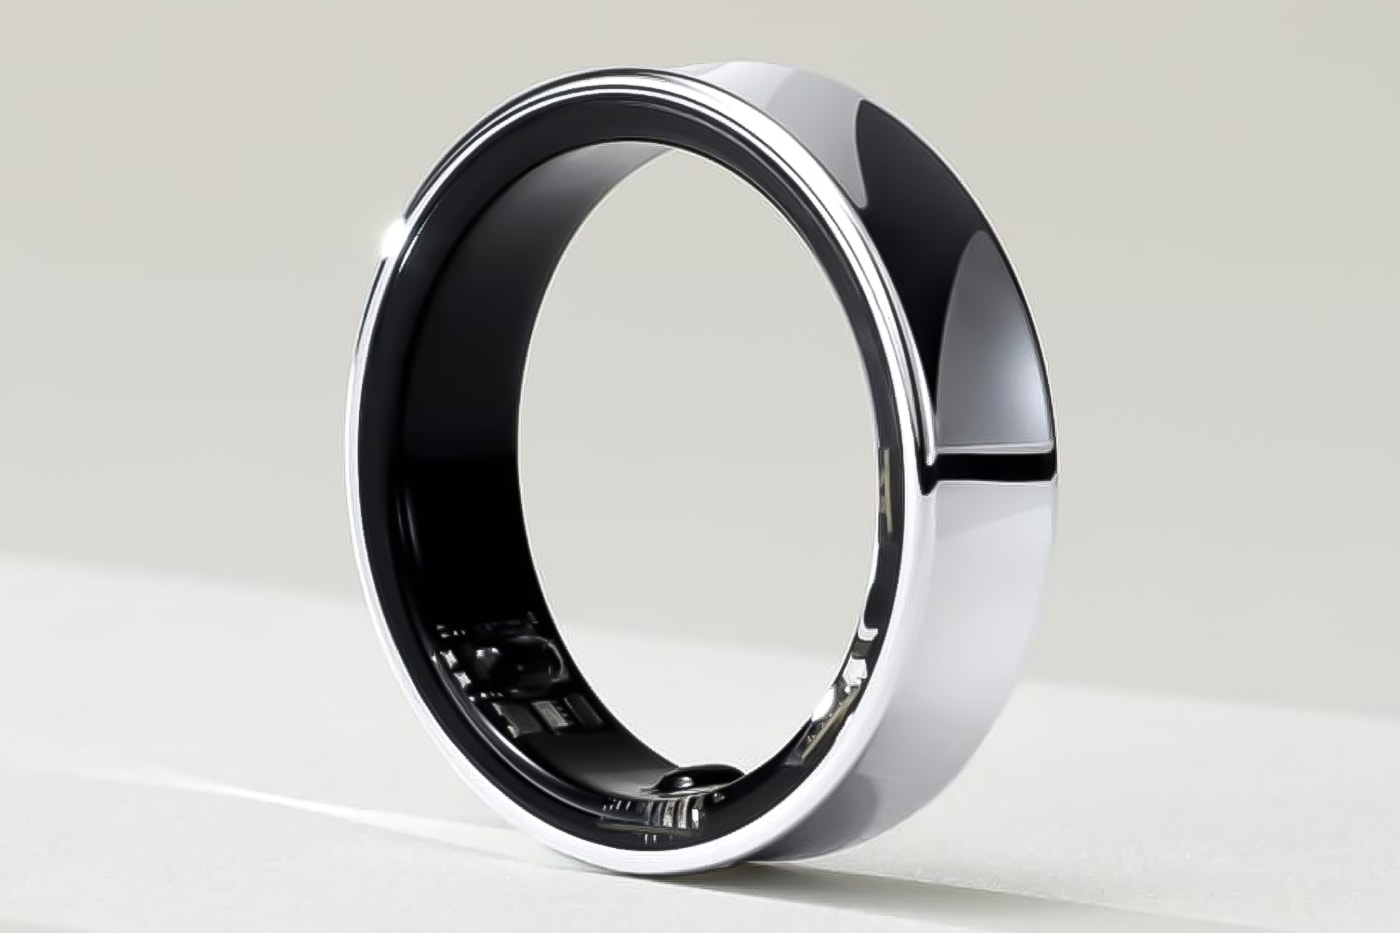 Samsung Galaxy Ring health data oura ring competitor teaser photo review conference launch debut release date